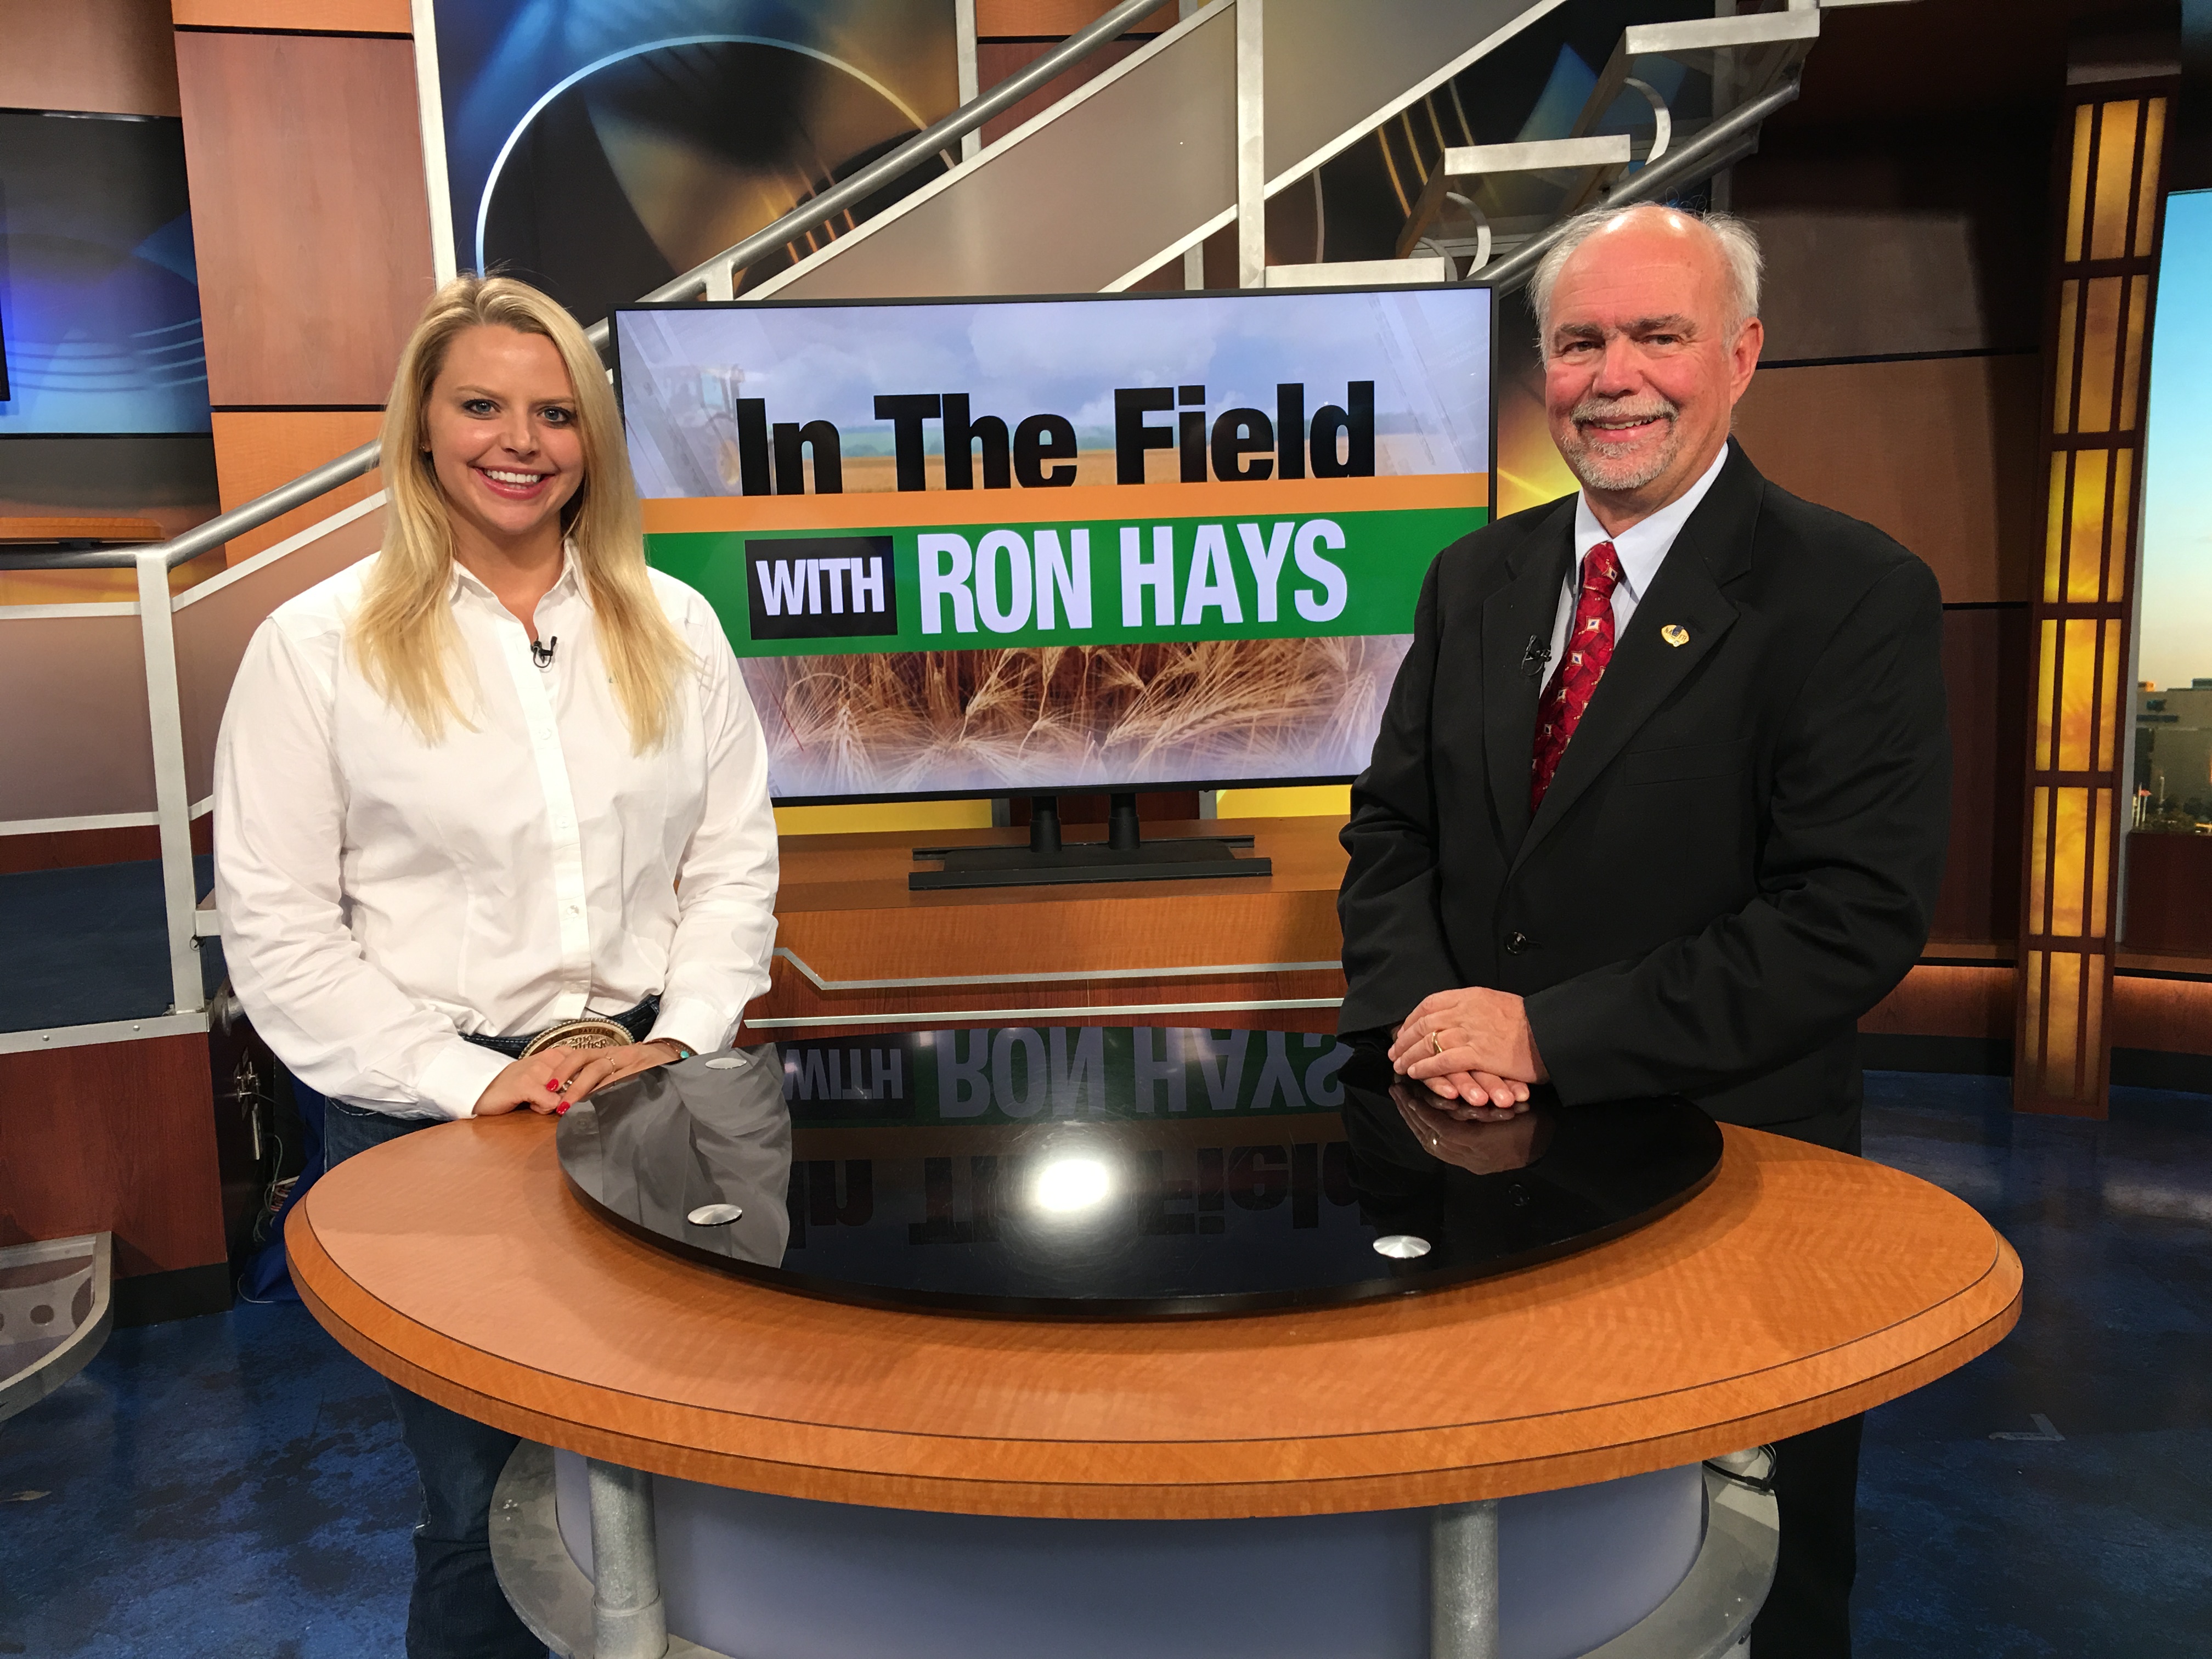 ICYMI - AQHA's Sarah Davisson Promotes the Lucas Oil World Championship Show on 'In the Field